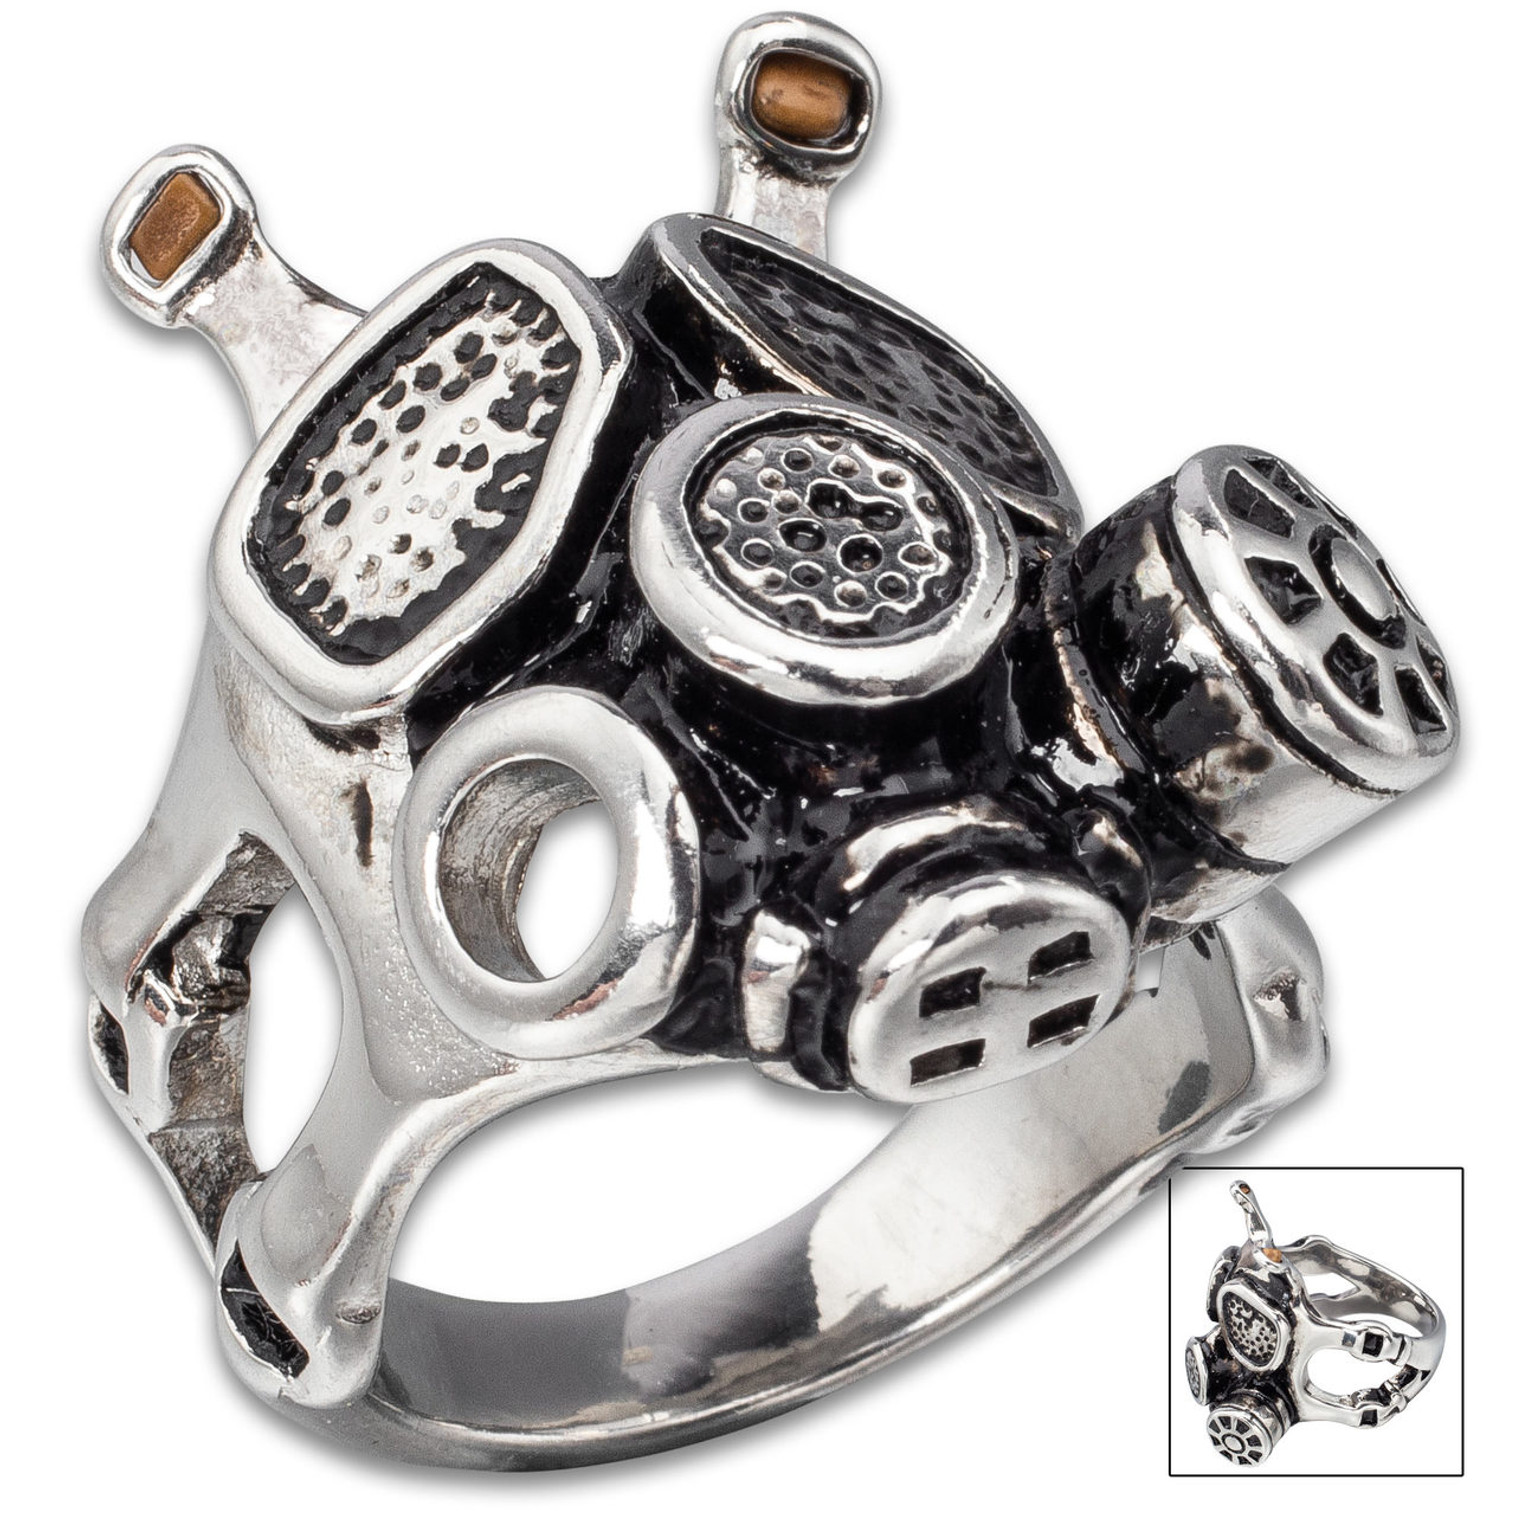 Apocalyptic Stainless Steel Gas Mask Ring